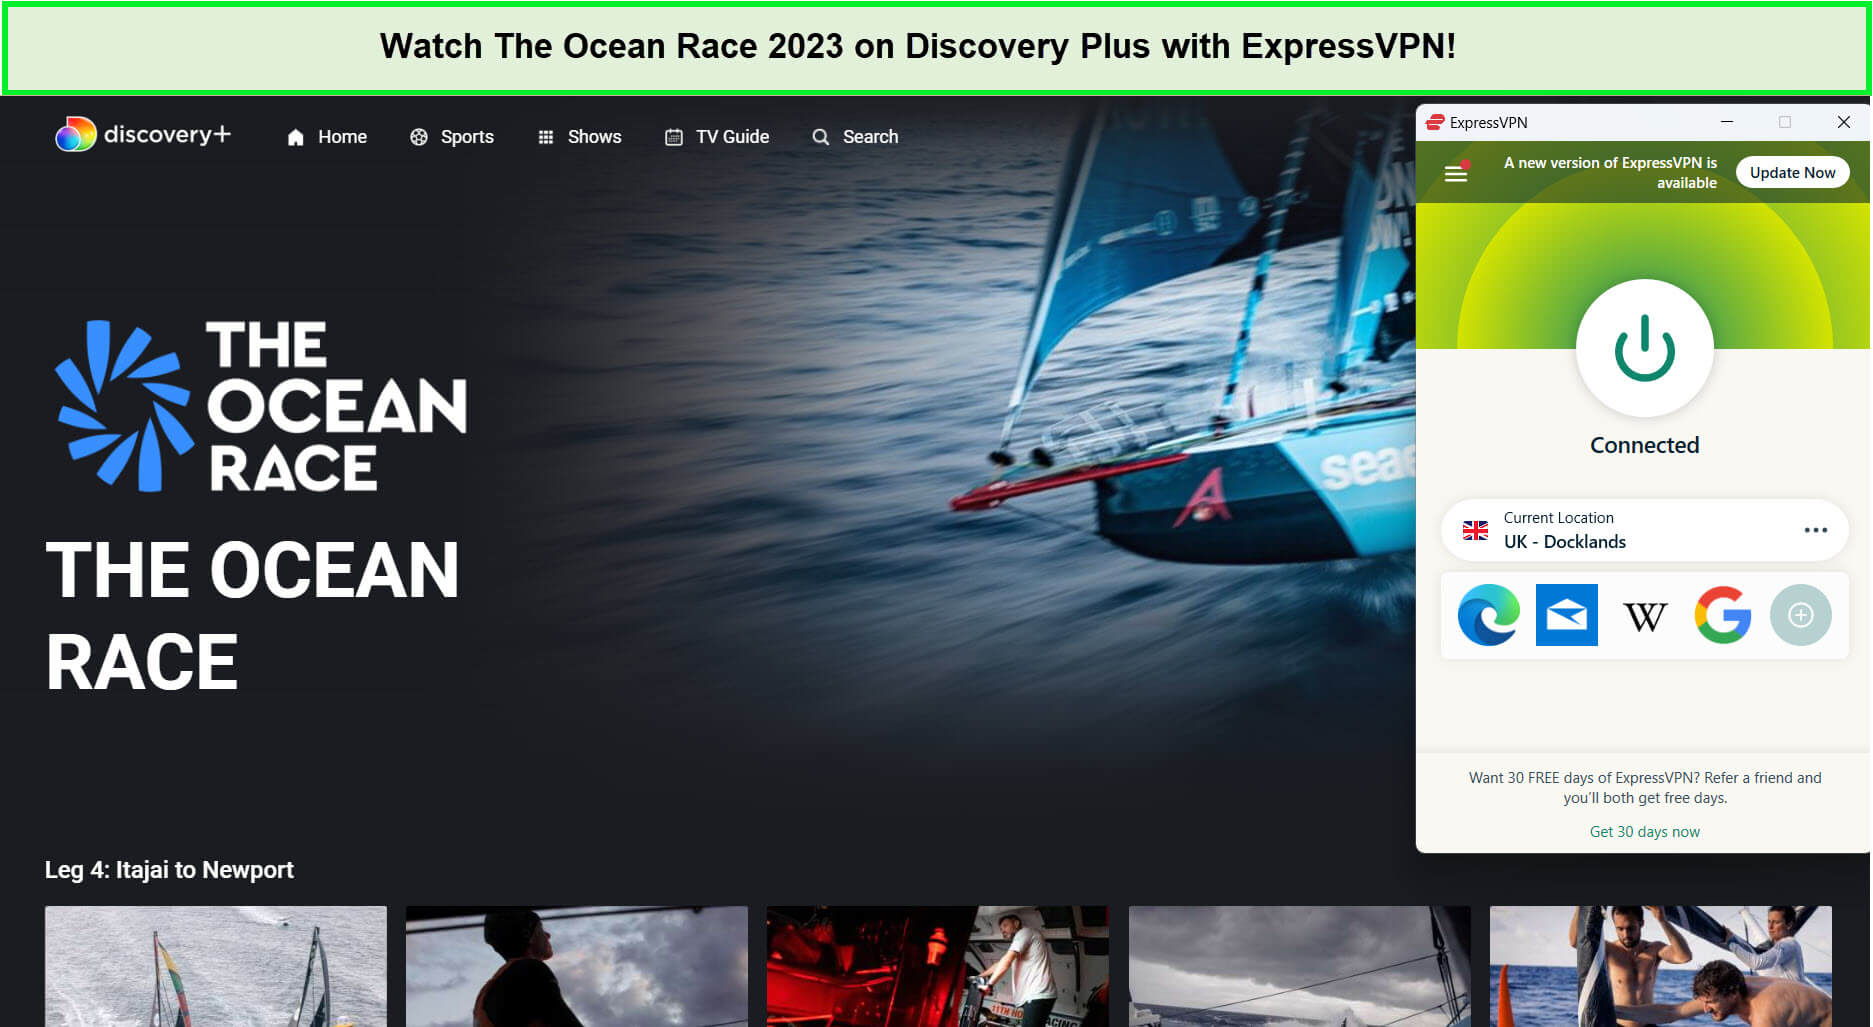 expressvpn-unblocks-the-ocean-race-2023-live-in-New Zealand-on-discovery-plus